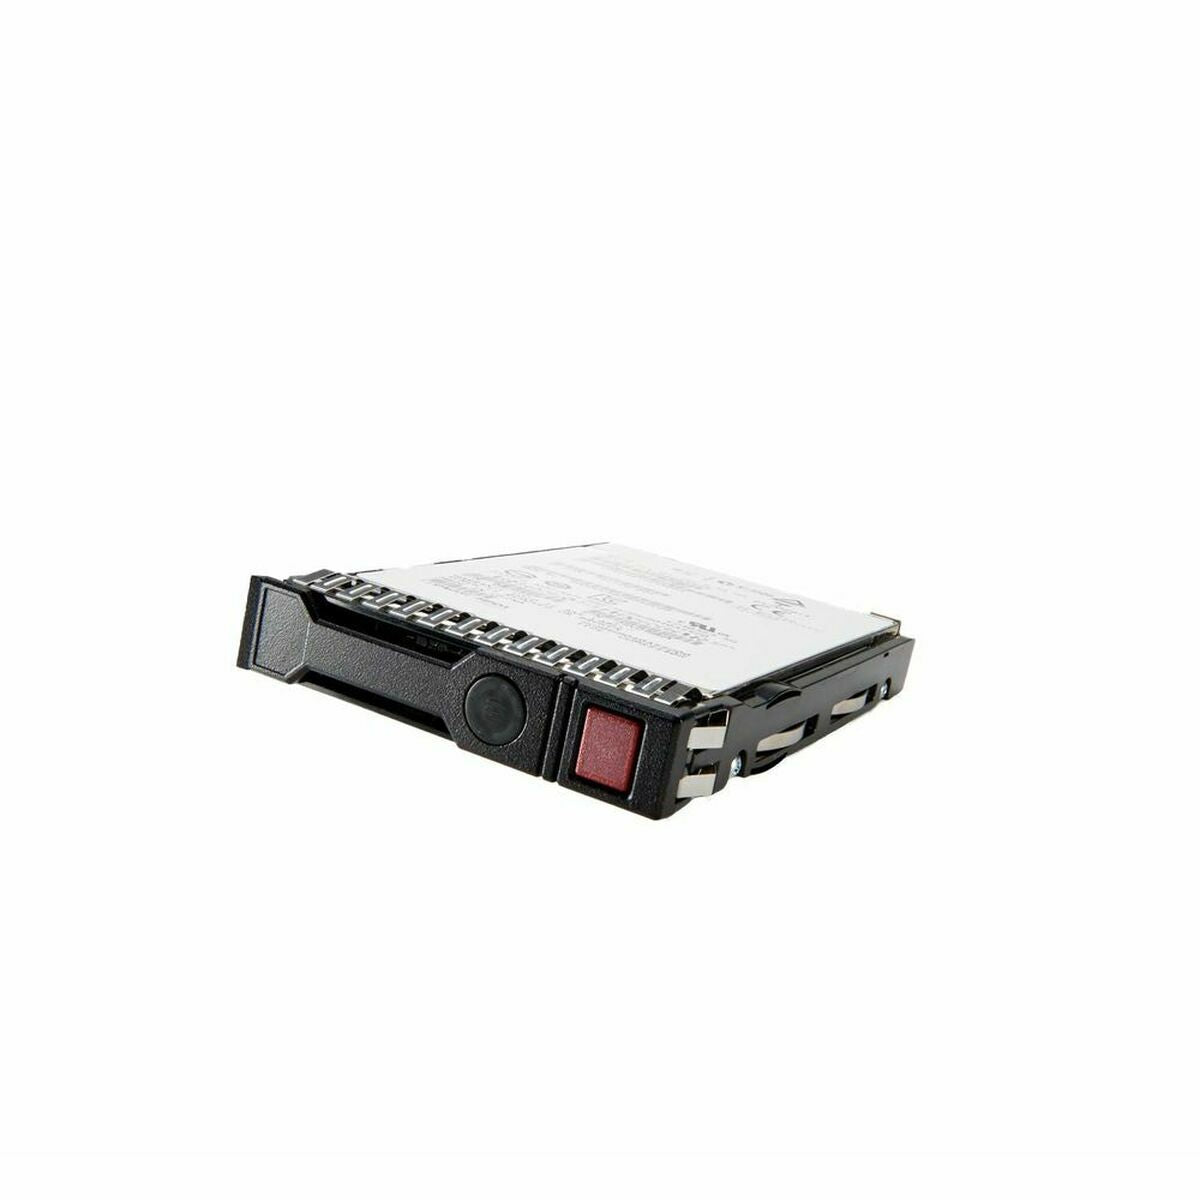 Hard Drive HPE R0Q47A 128 GB SSD 1,92 TB SSD, HPE, Computing, Data storage, hard-drive-hpe-r0q47a-128-gb-ssd-1-92-tb-ssd, Brand_HPE, category-reference-2609, category-reference-2803, category-reference-2806, category-reference-t-19685, category-reference-t-19909, category-reference-t-21357, computers / components, Condition_NEW, Price_+ 1000, Teleworking, RiotNook